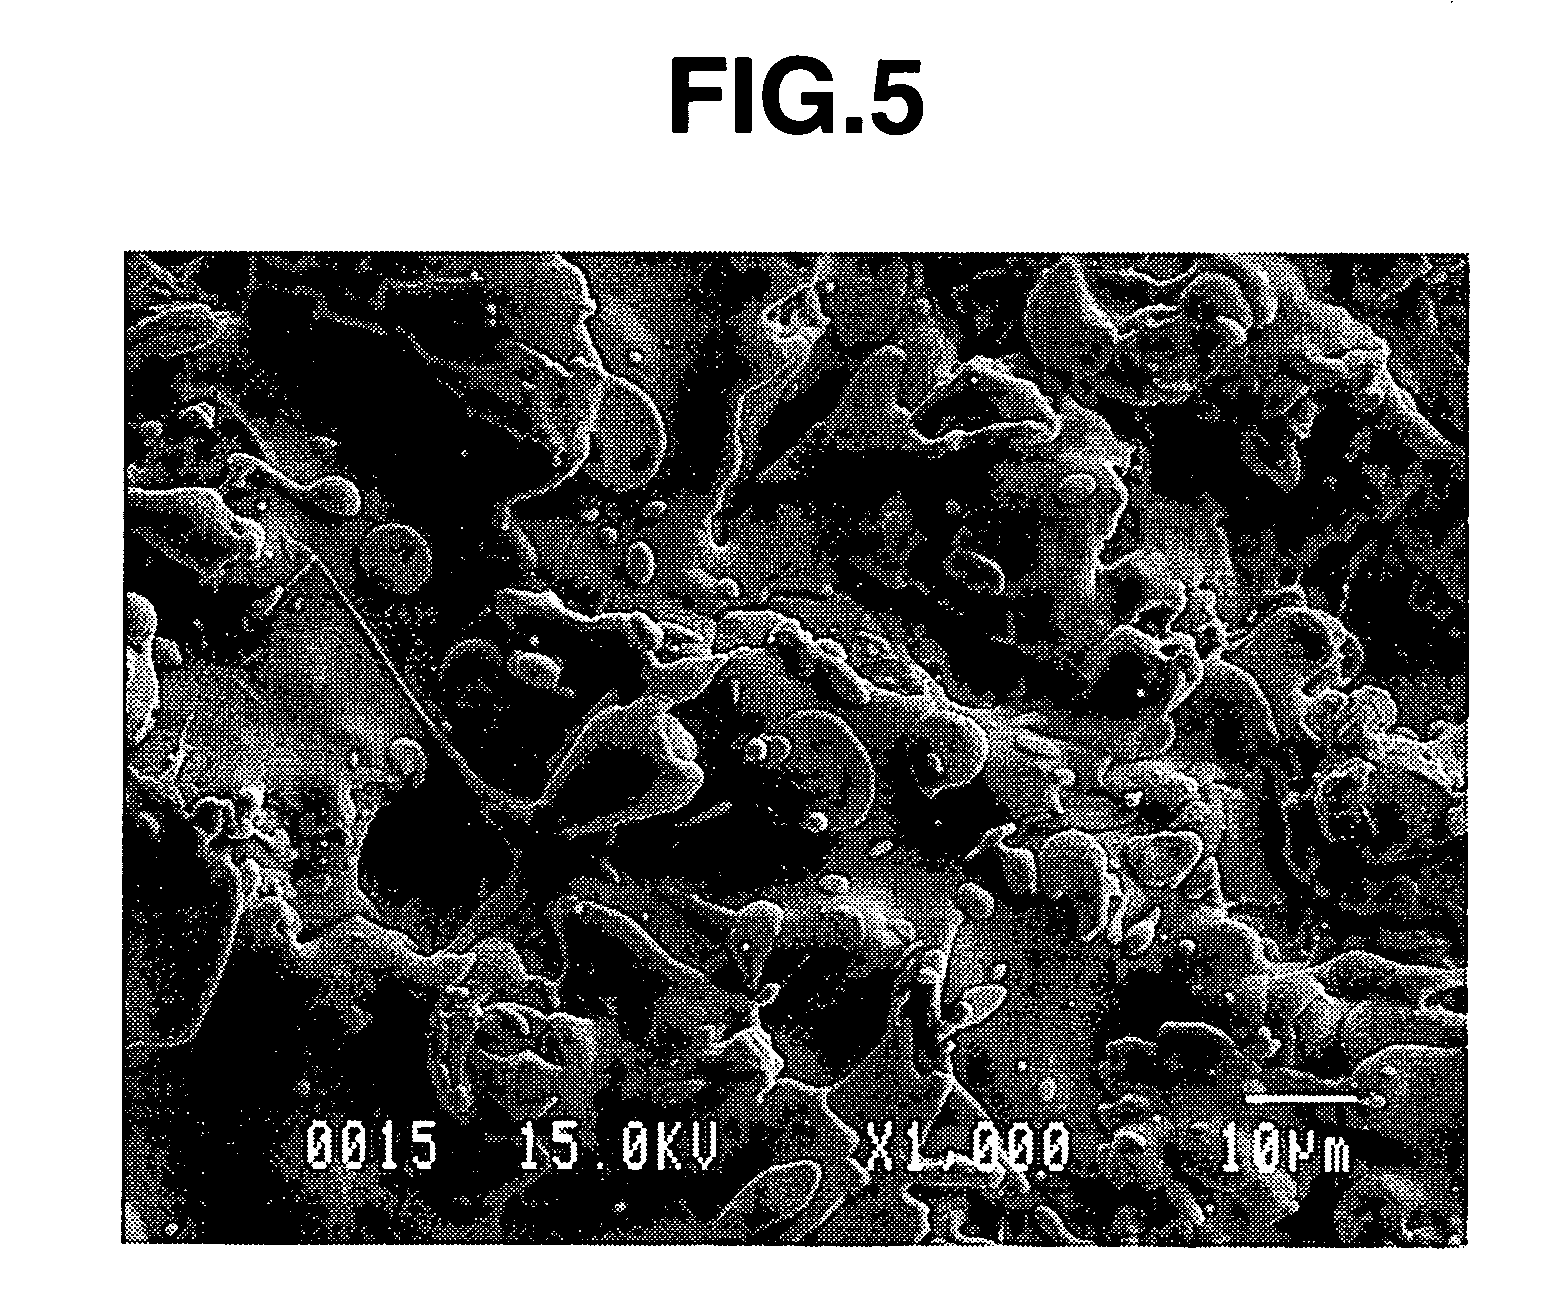 Fluoride-containing coating and coated member